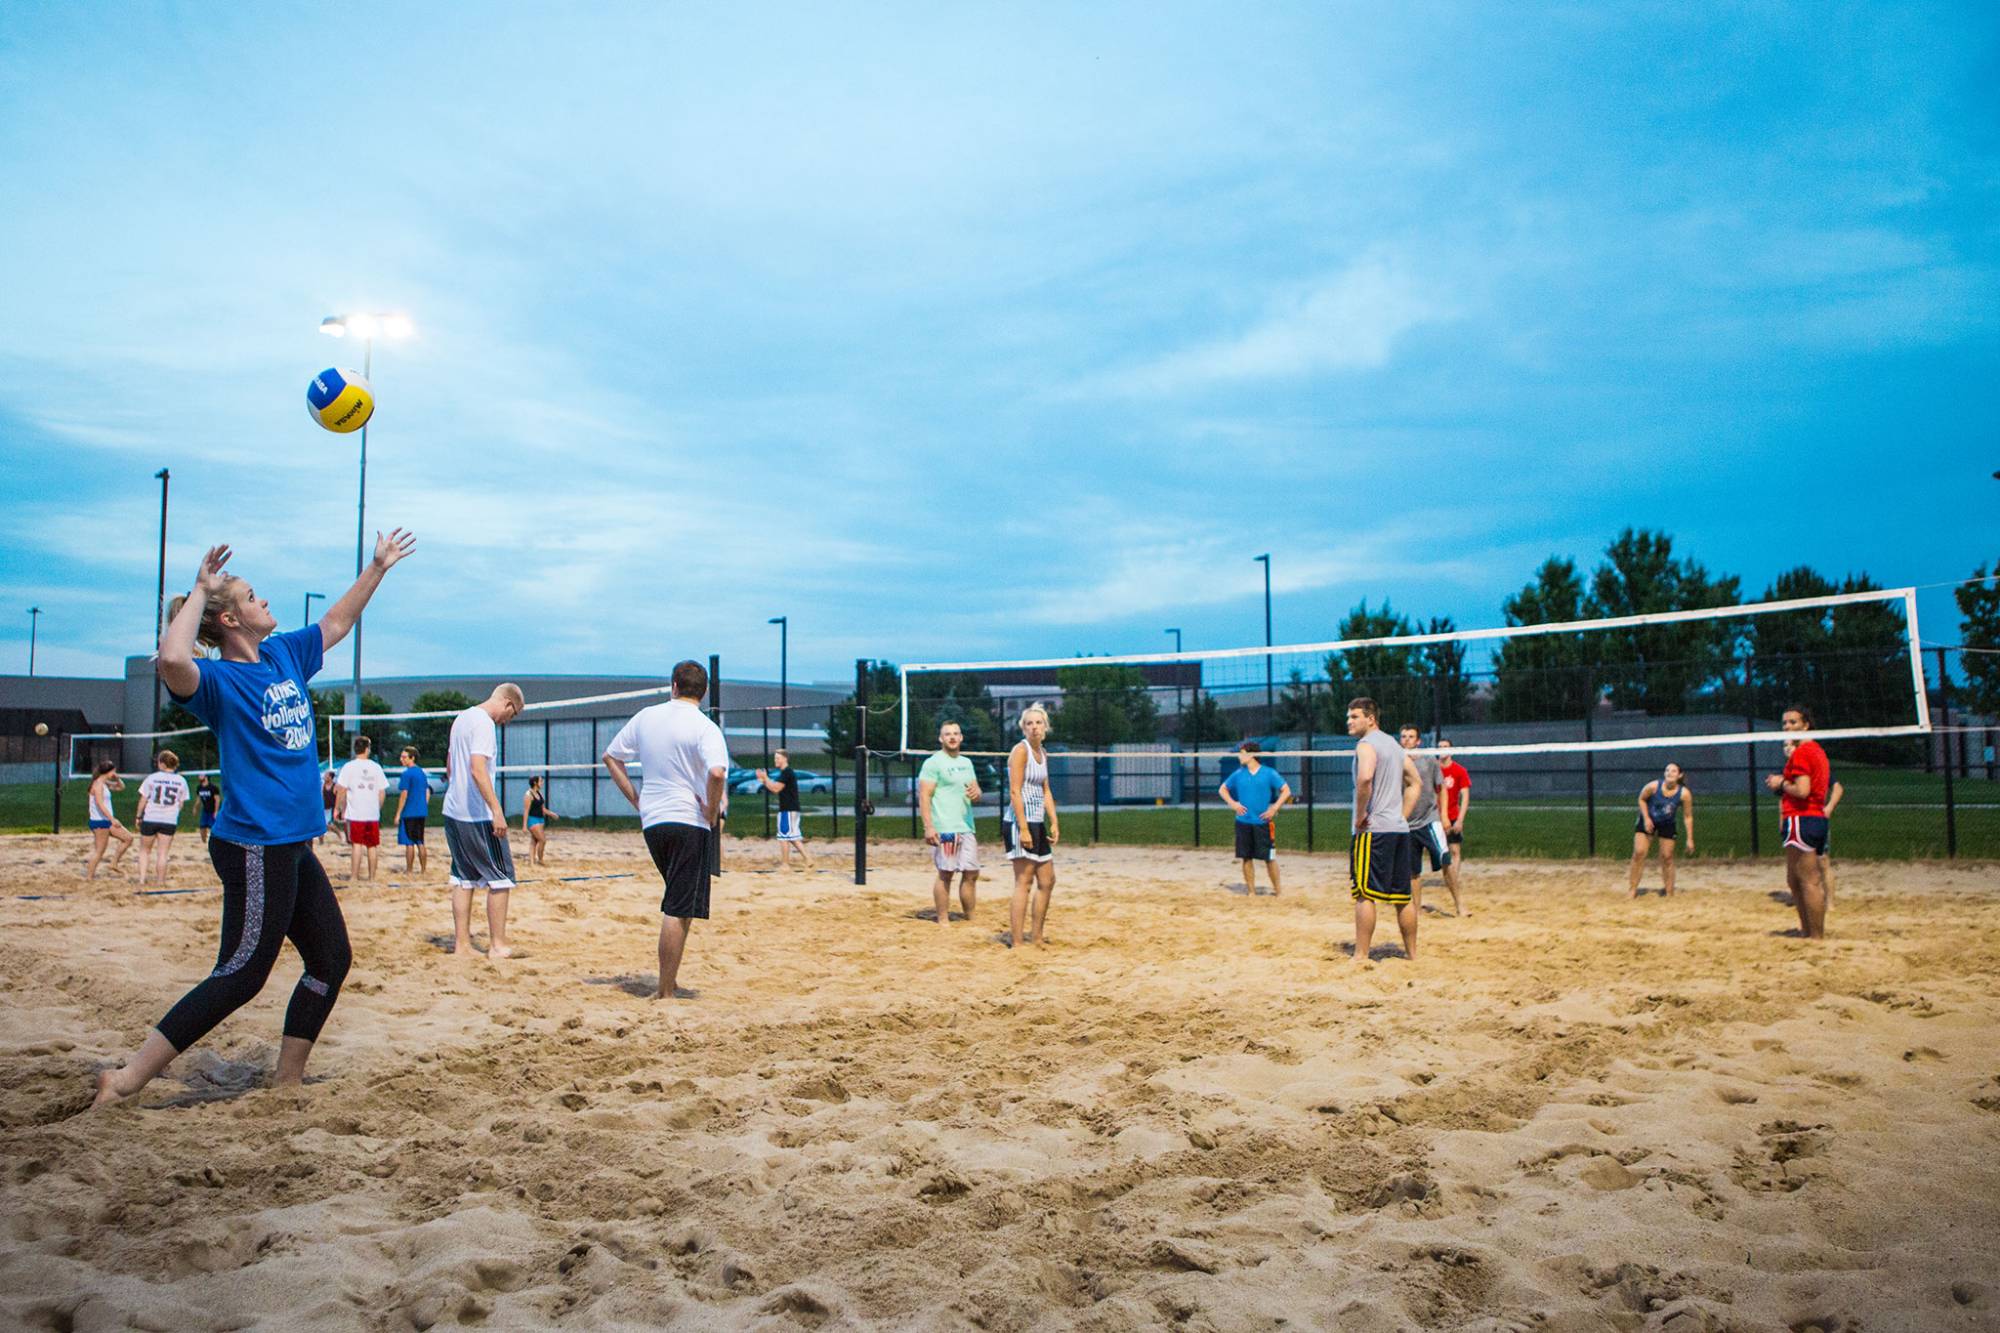 Students playing Volleyball